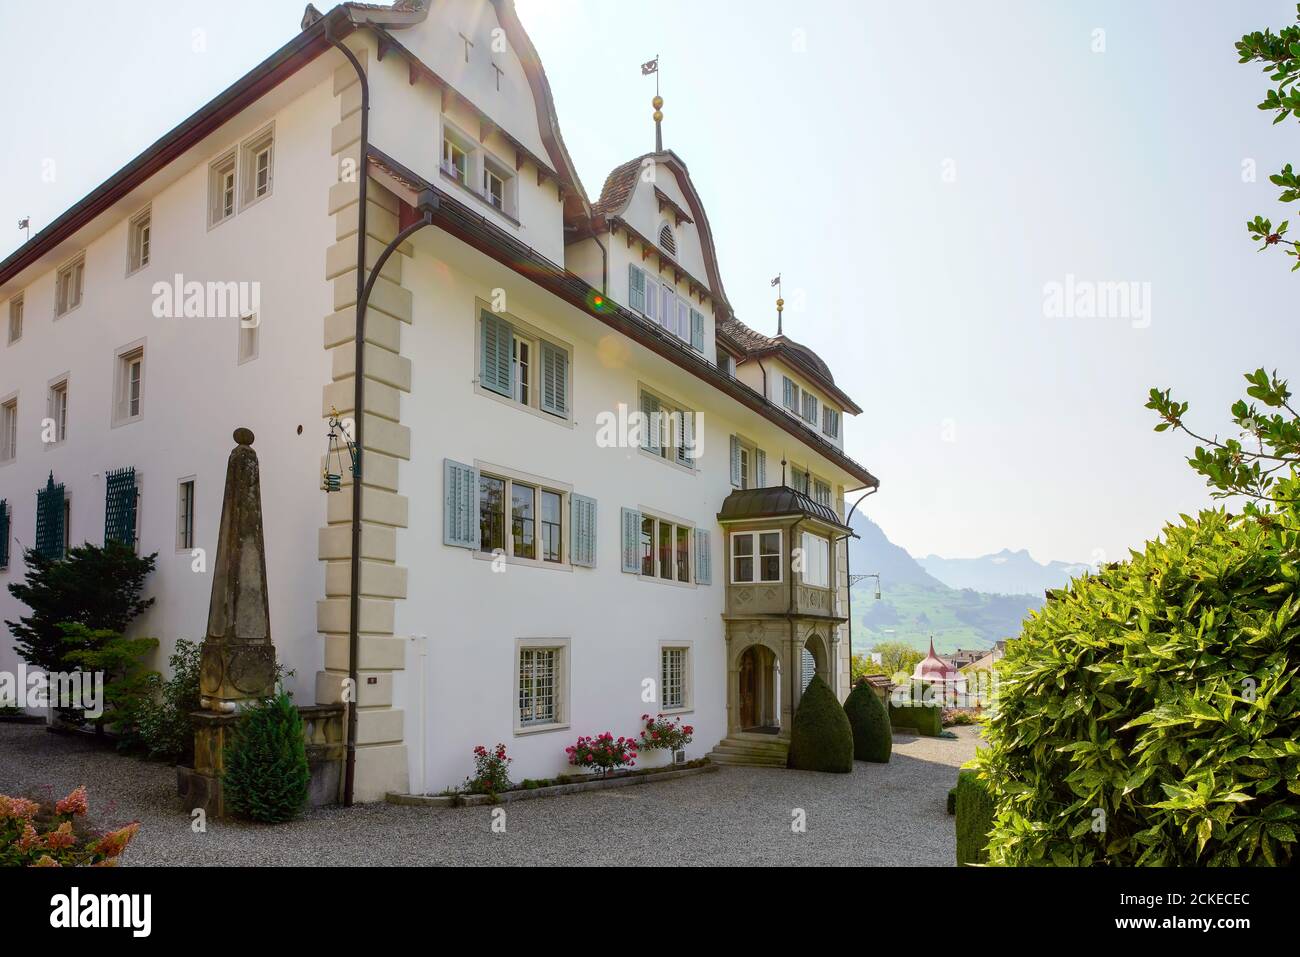 The house on Schmiedgasse was built between 1614 and 1617 by the French Guard Captain Rudolf von Reding. Schwyz, the capital of Schwyz canton in Switz Stock Photo